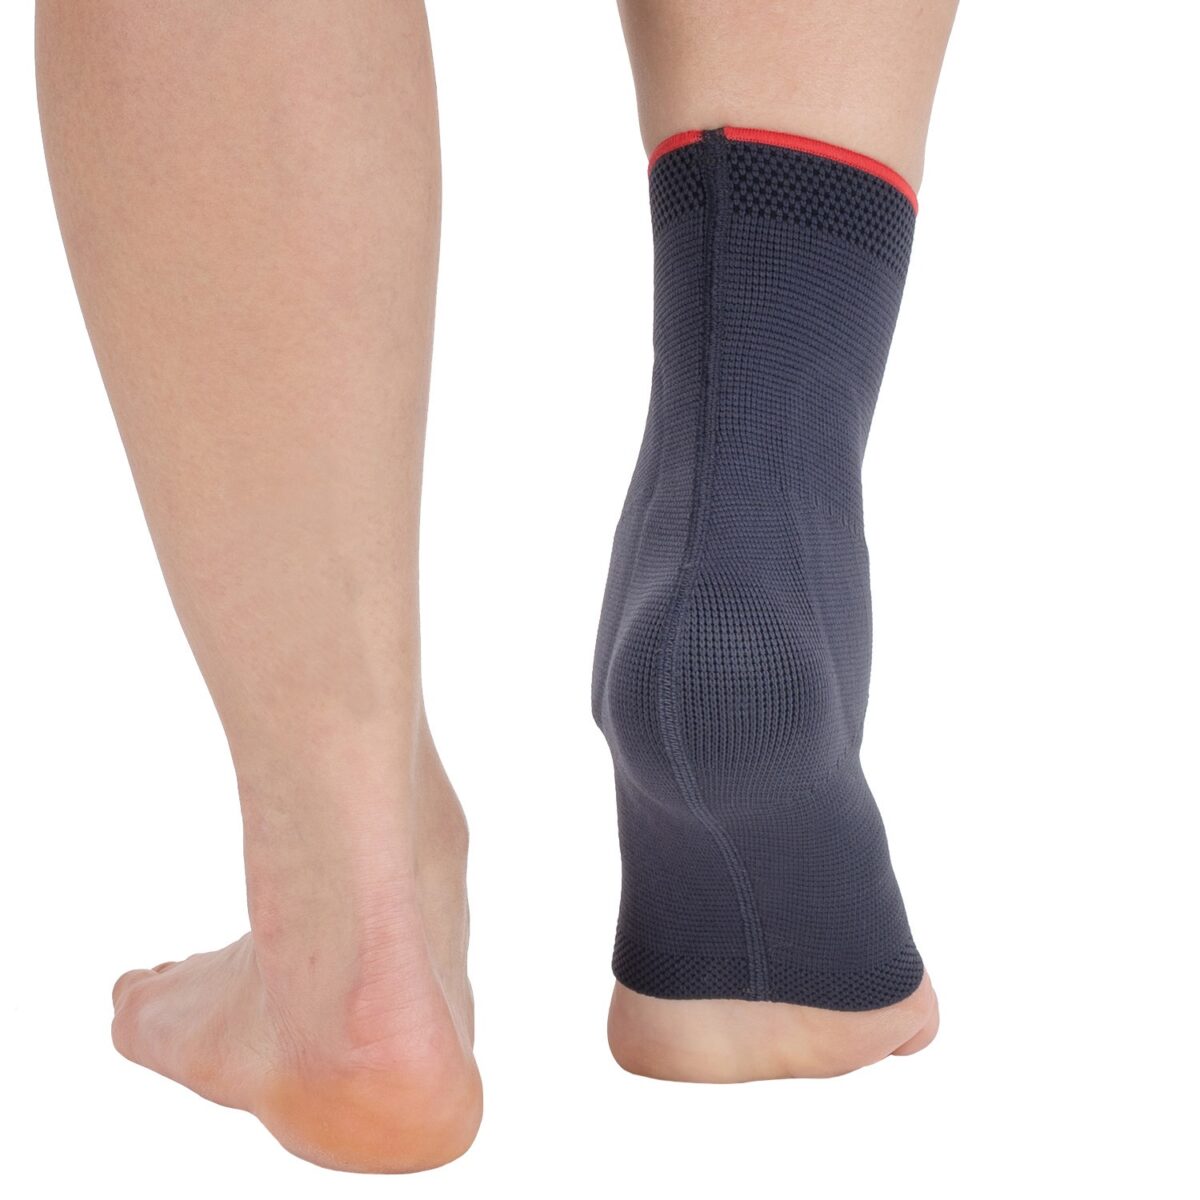 wingmed orthopedic equipments W604 woven malleol ankle support 16 2